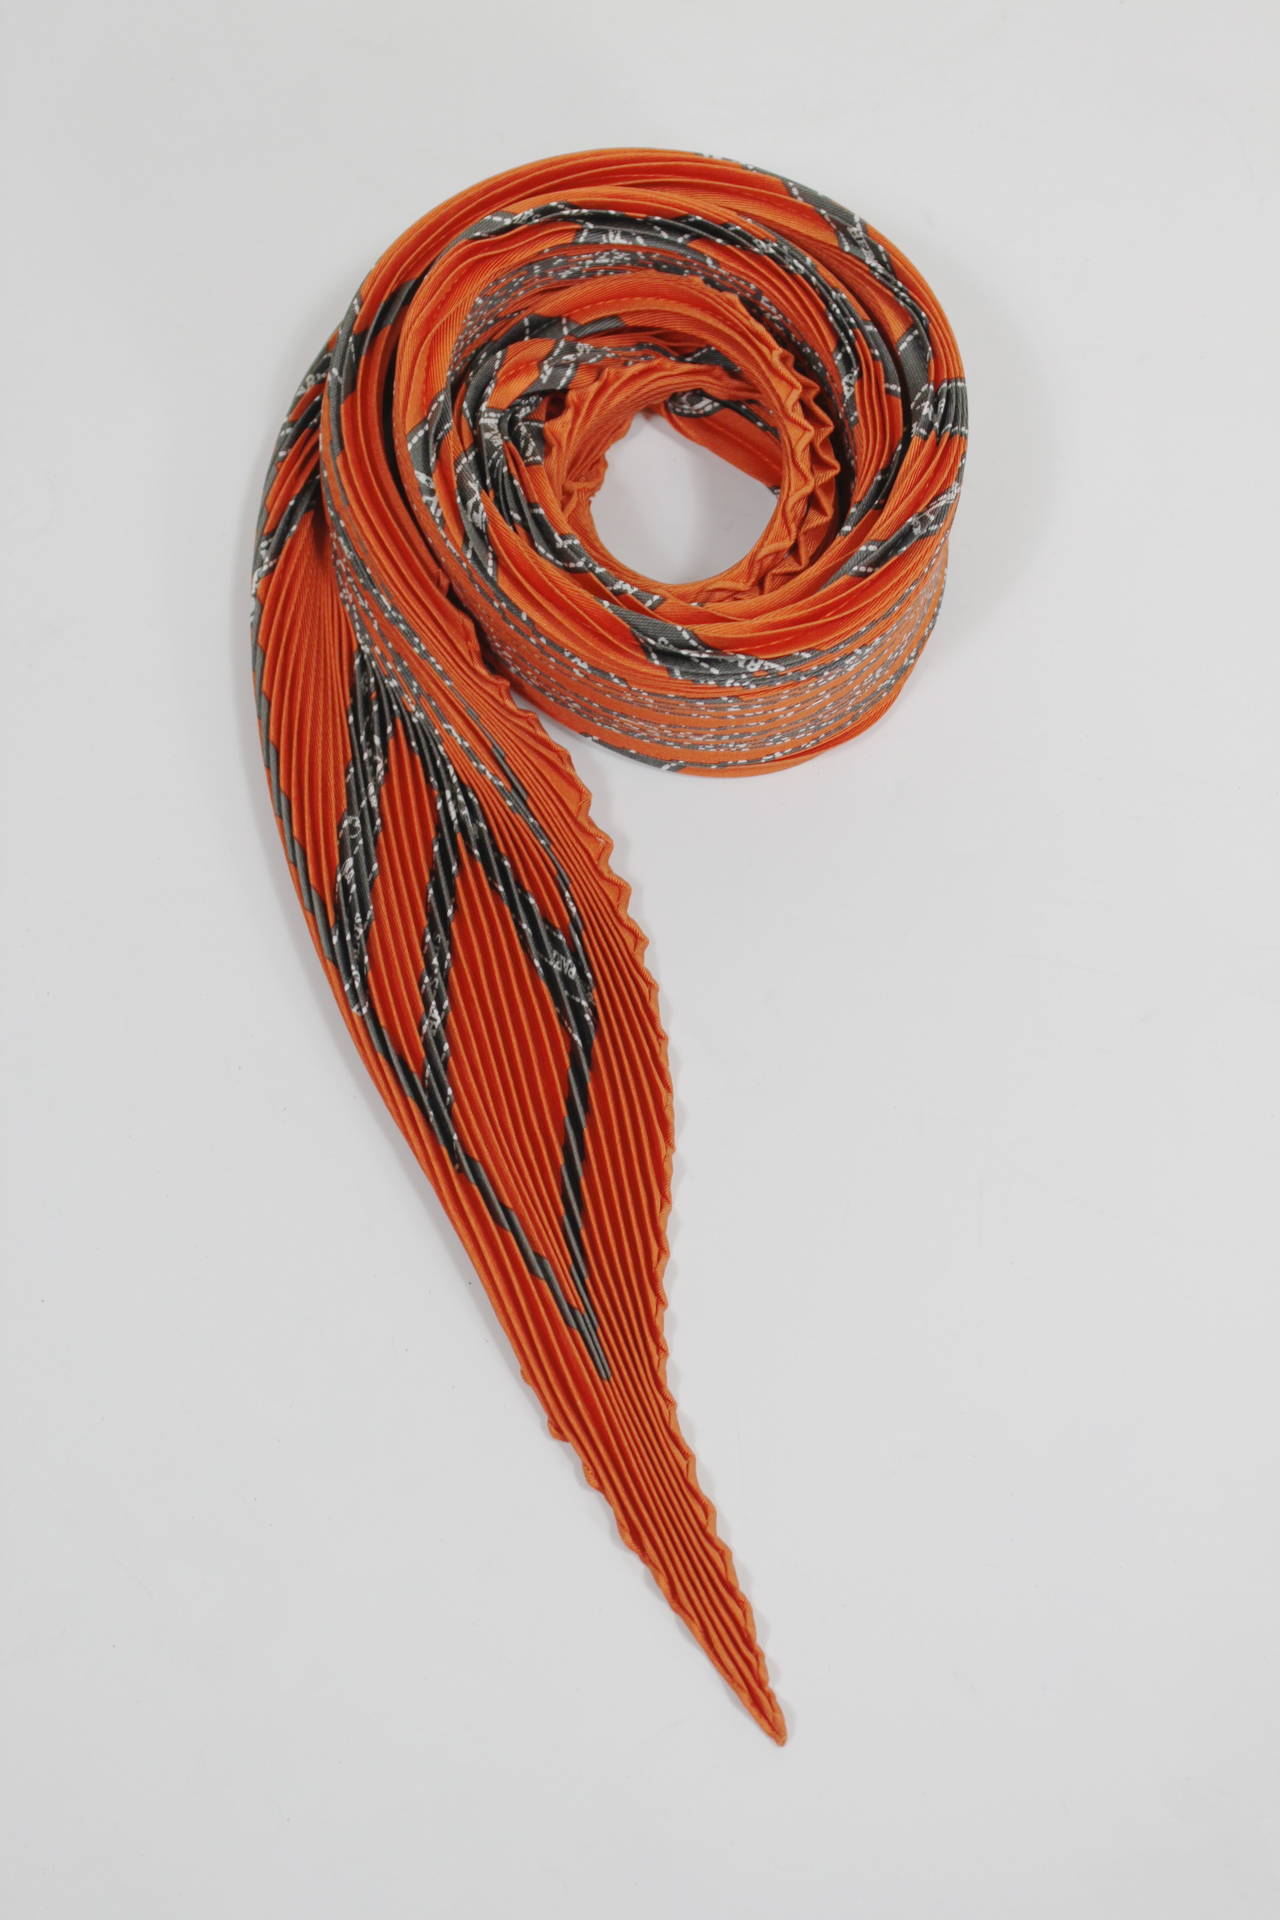 A classic plisse scarf from Hermès featuring the legendary brand's iconic orange and brown ribbon print. The scarf still has its original box.

Measurements--
50.5 inches from point to point